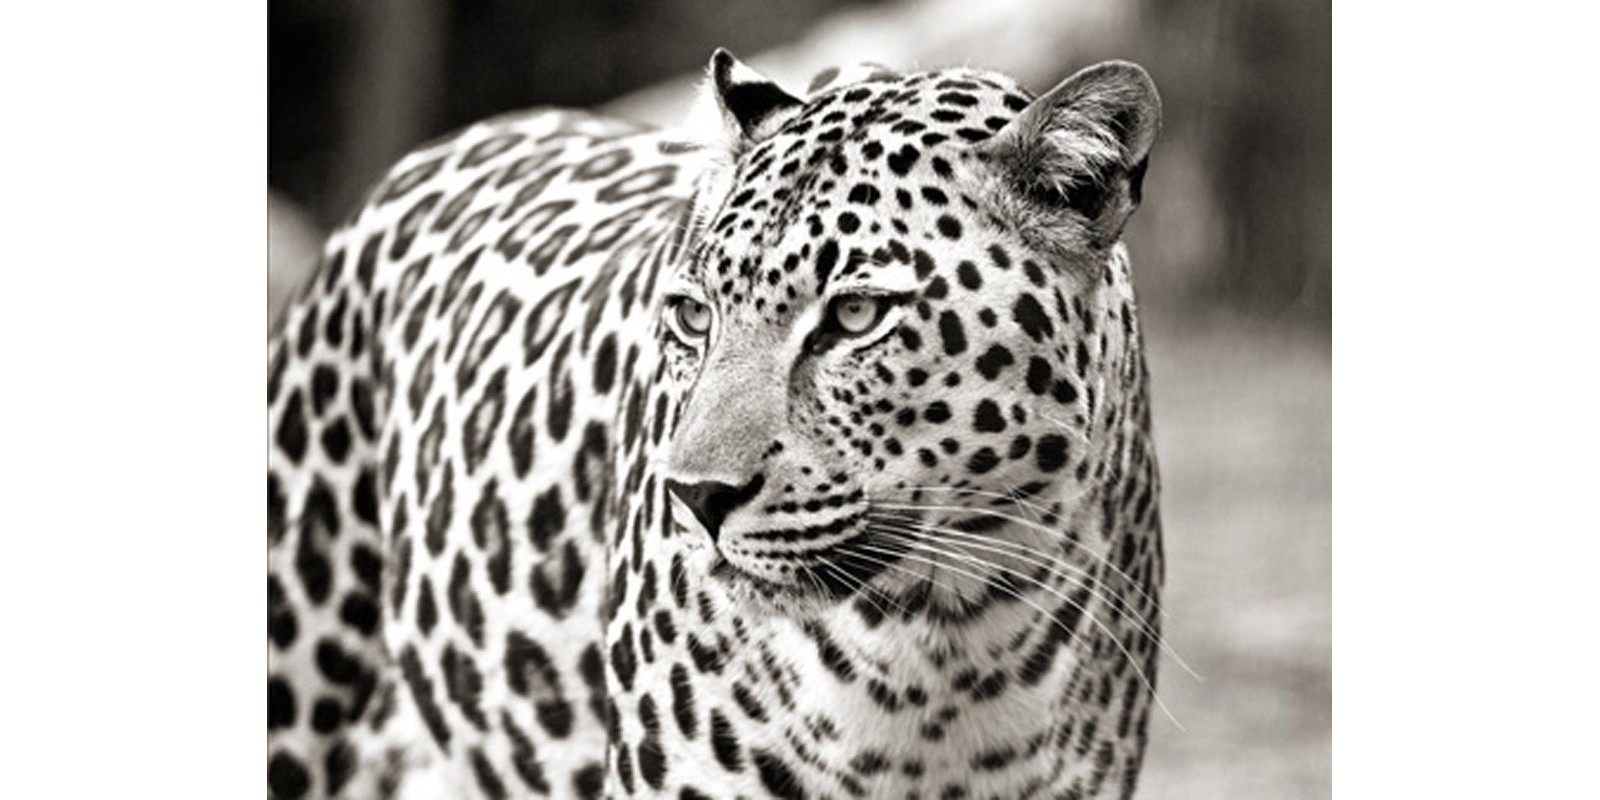 Anonymous - Portrait of leopard, South Africa